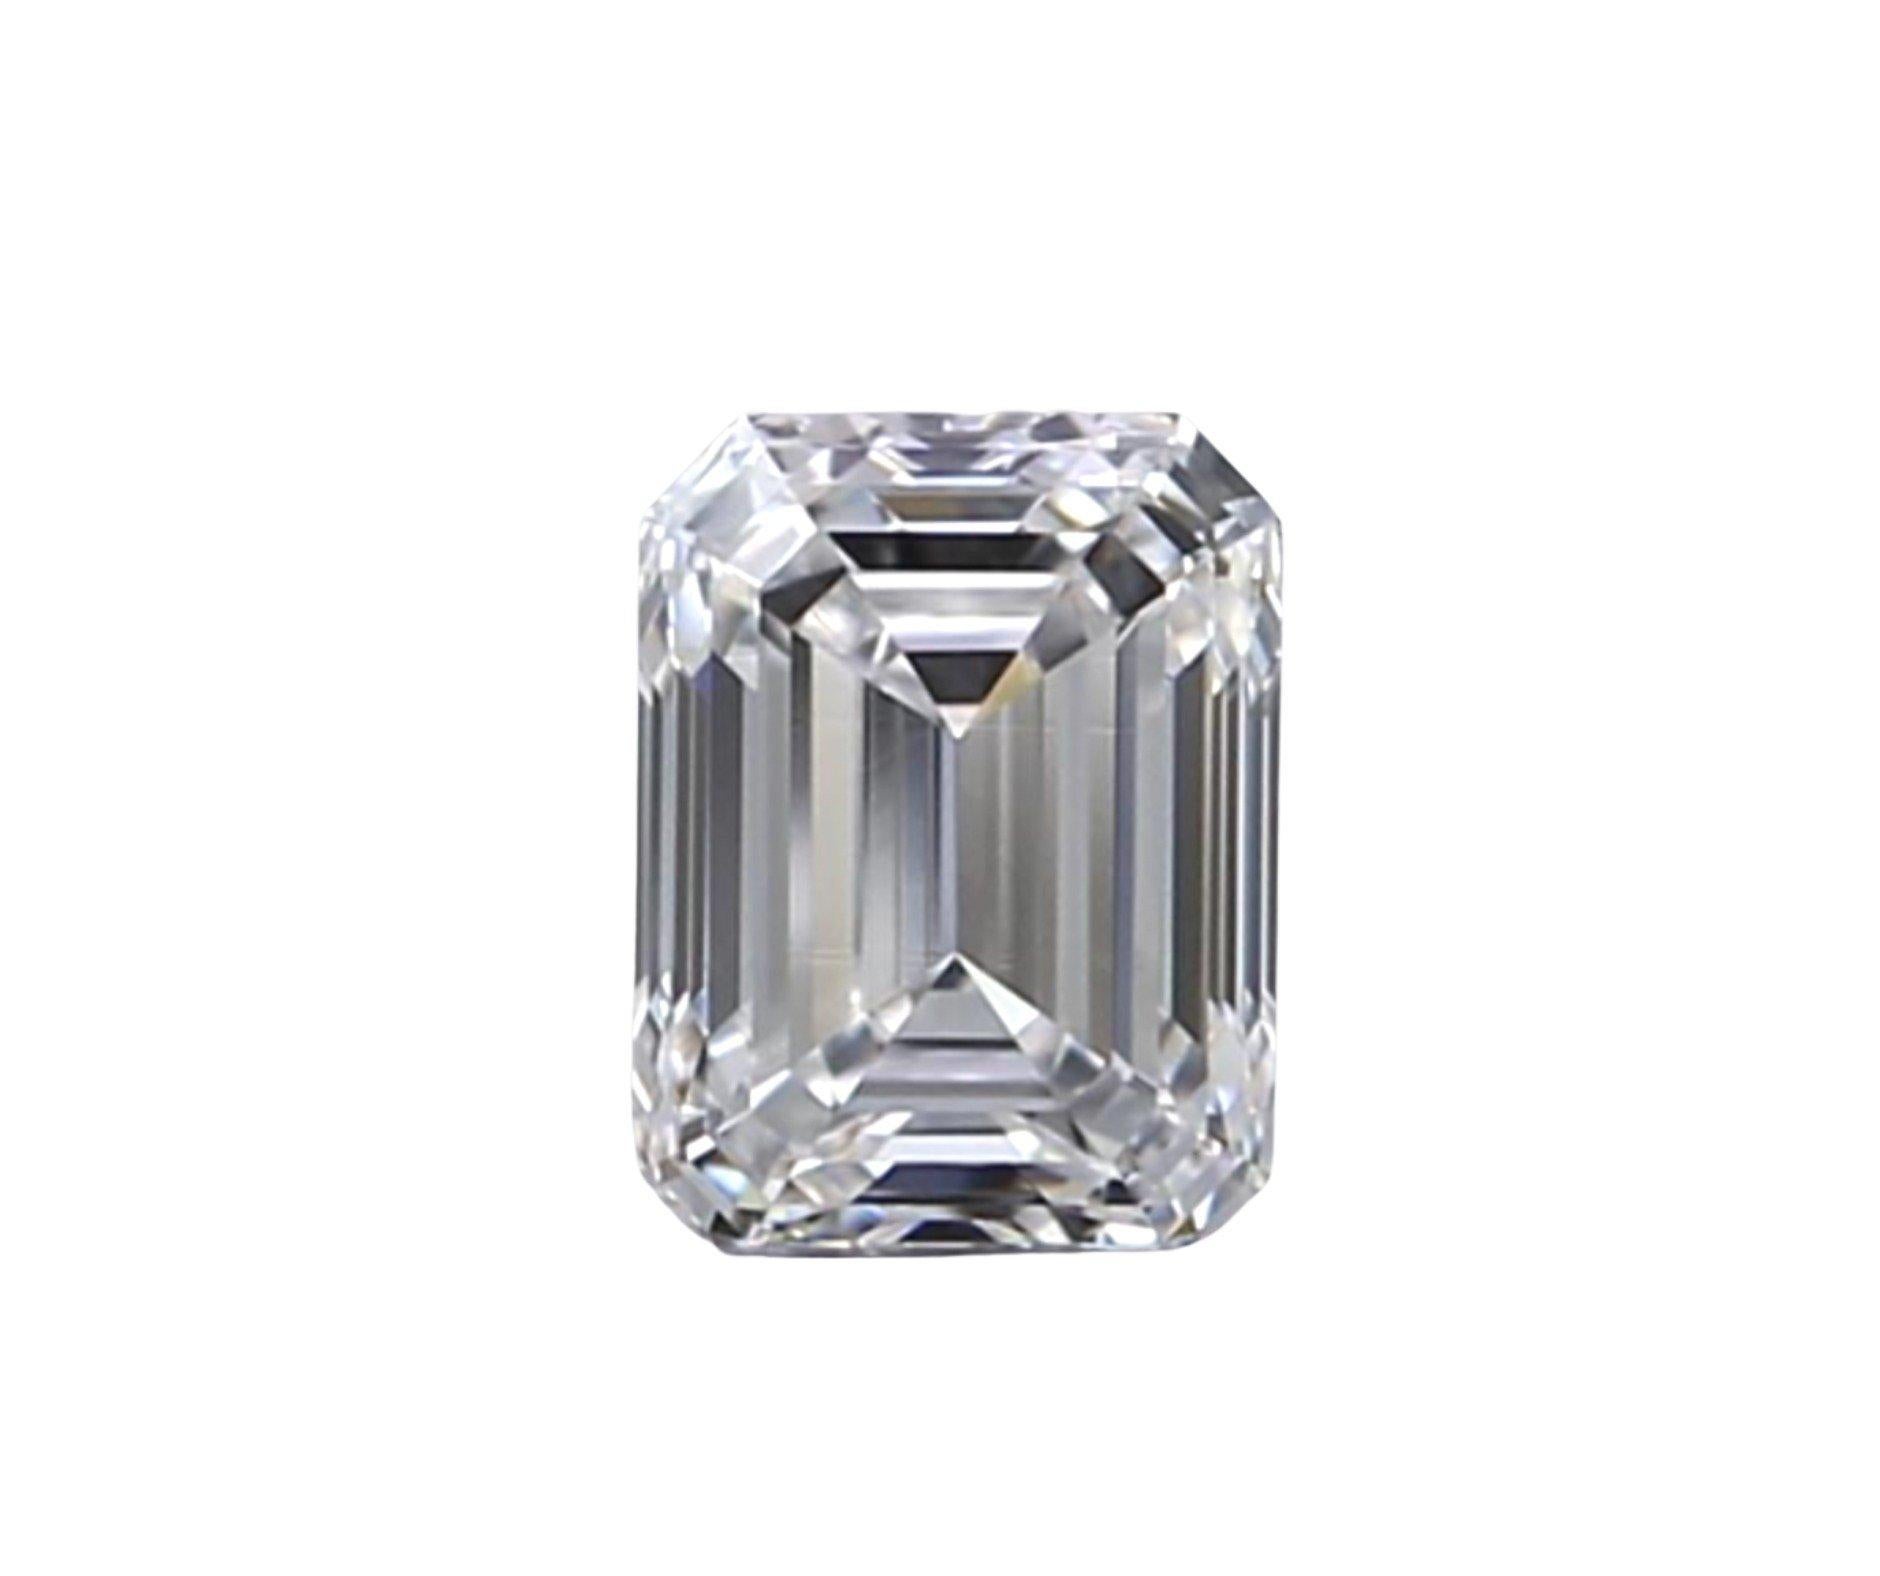 1 Sparkling natural Emerald cut diamond in a 0.52 carat F IF Excellent cut. This diamond comes with GIA Certificate and laser inscription number.

SKU: PT-1205
GIA 2444184927